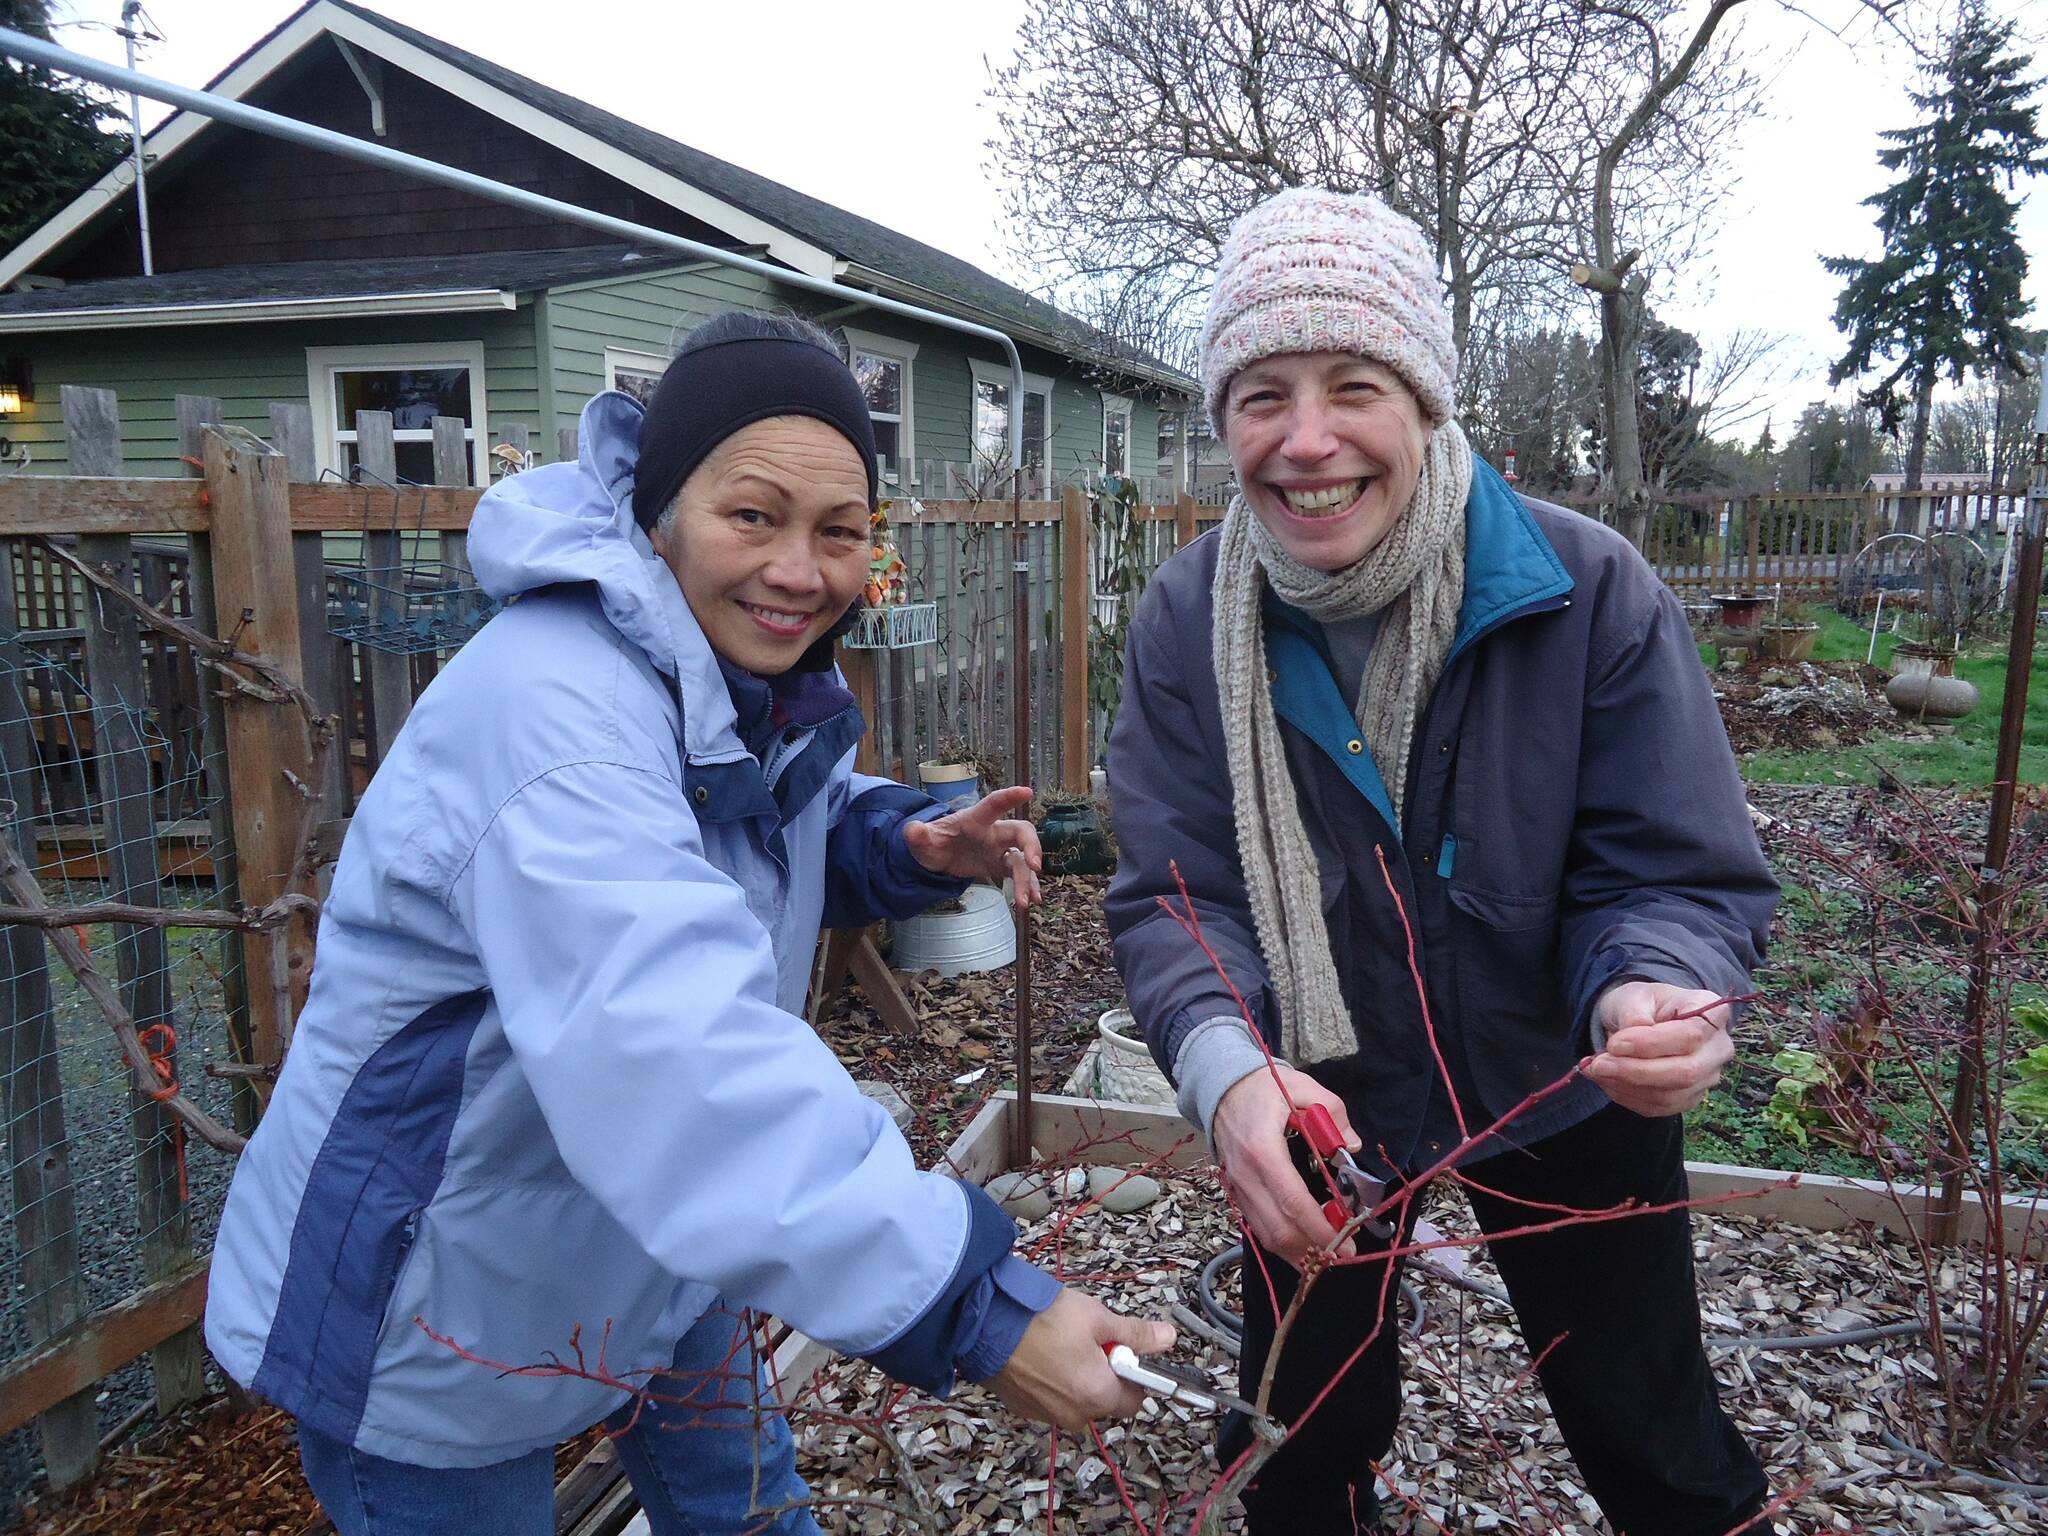 PRUNING BLUEBERRIES FOR PRODUCTIVITY. Clallam County Master Gardeners Audreen Williams and Jeanette Stehr-Green will discuss blueberry pruning via Zoom from 10:30 am to 12 noon on Saturday, Feb. 5. See Clallam County Master Gardener calendar for viewing details.